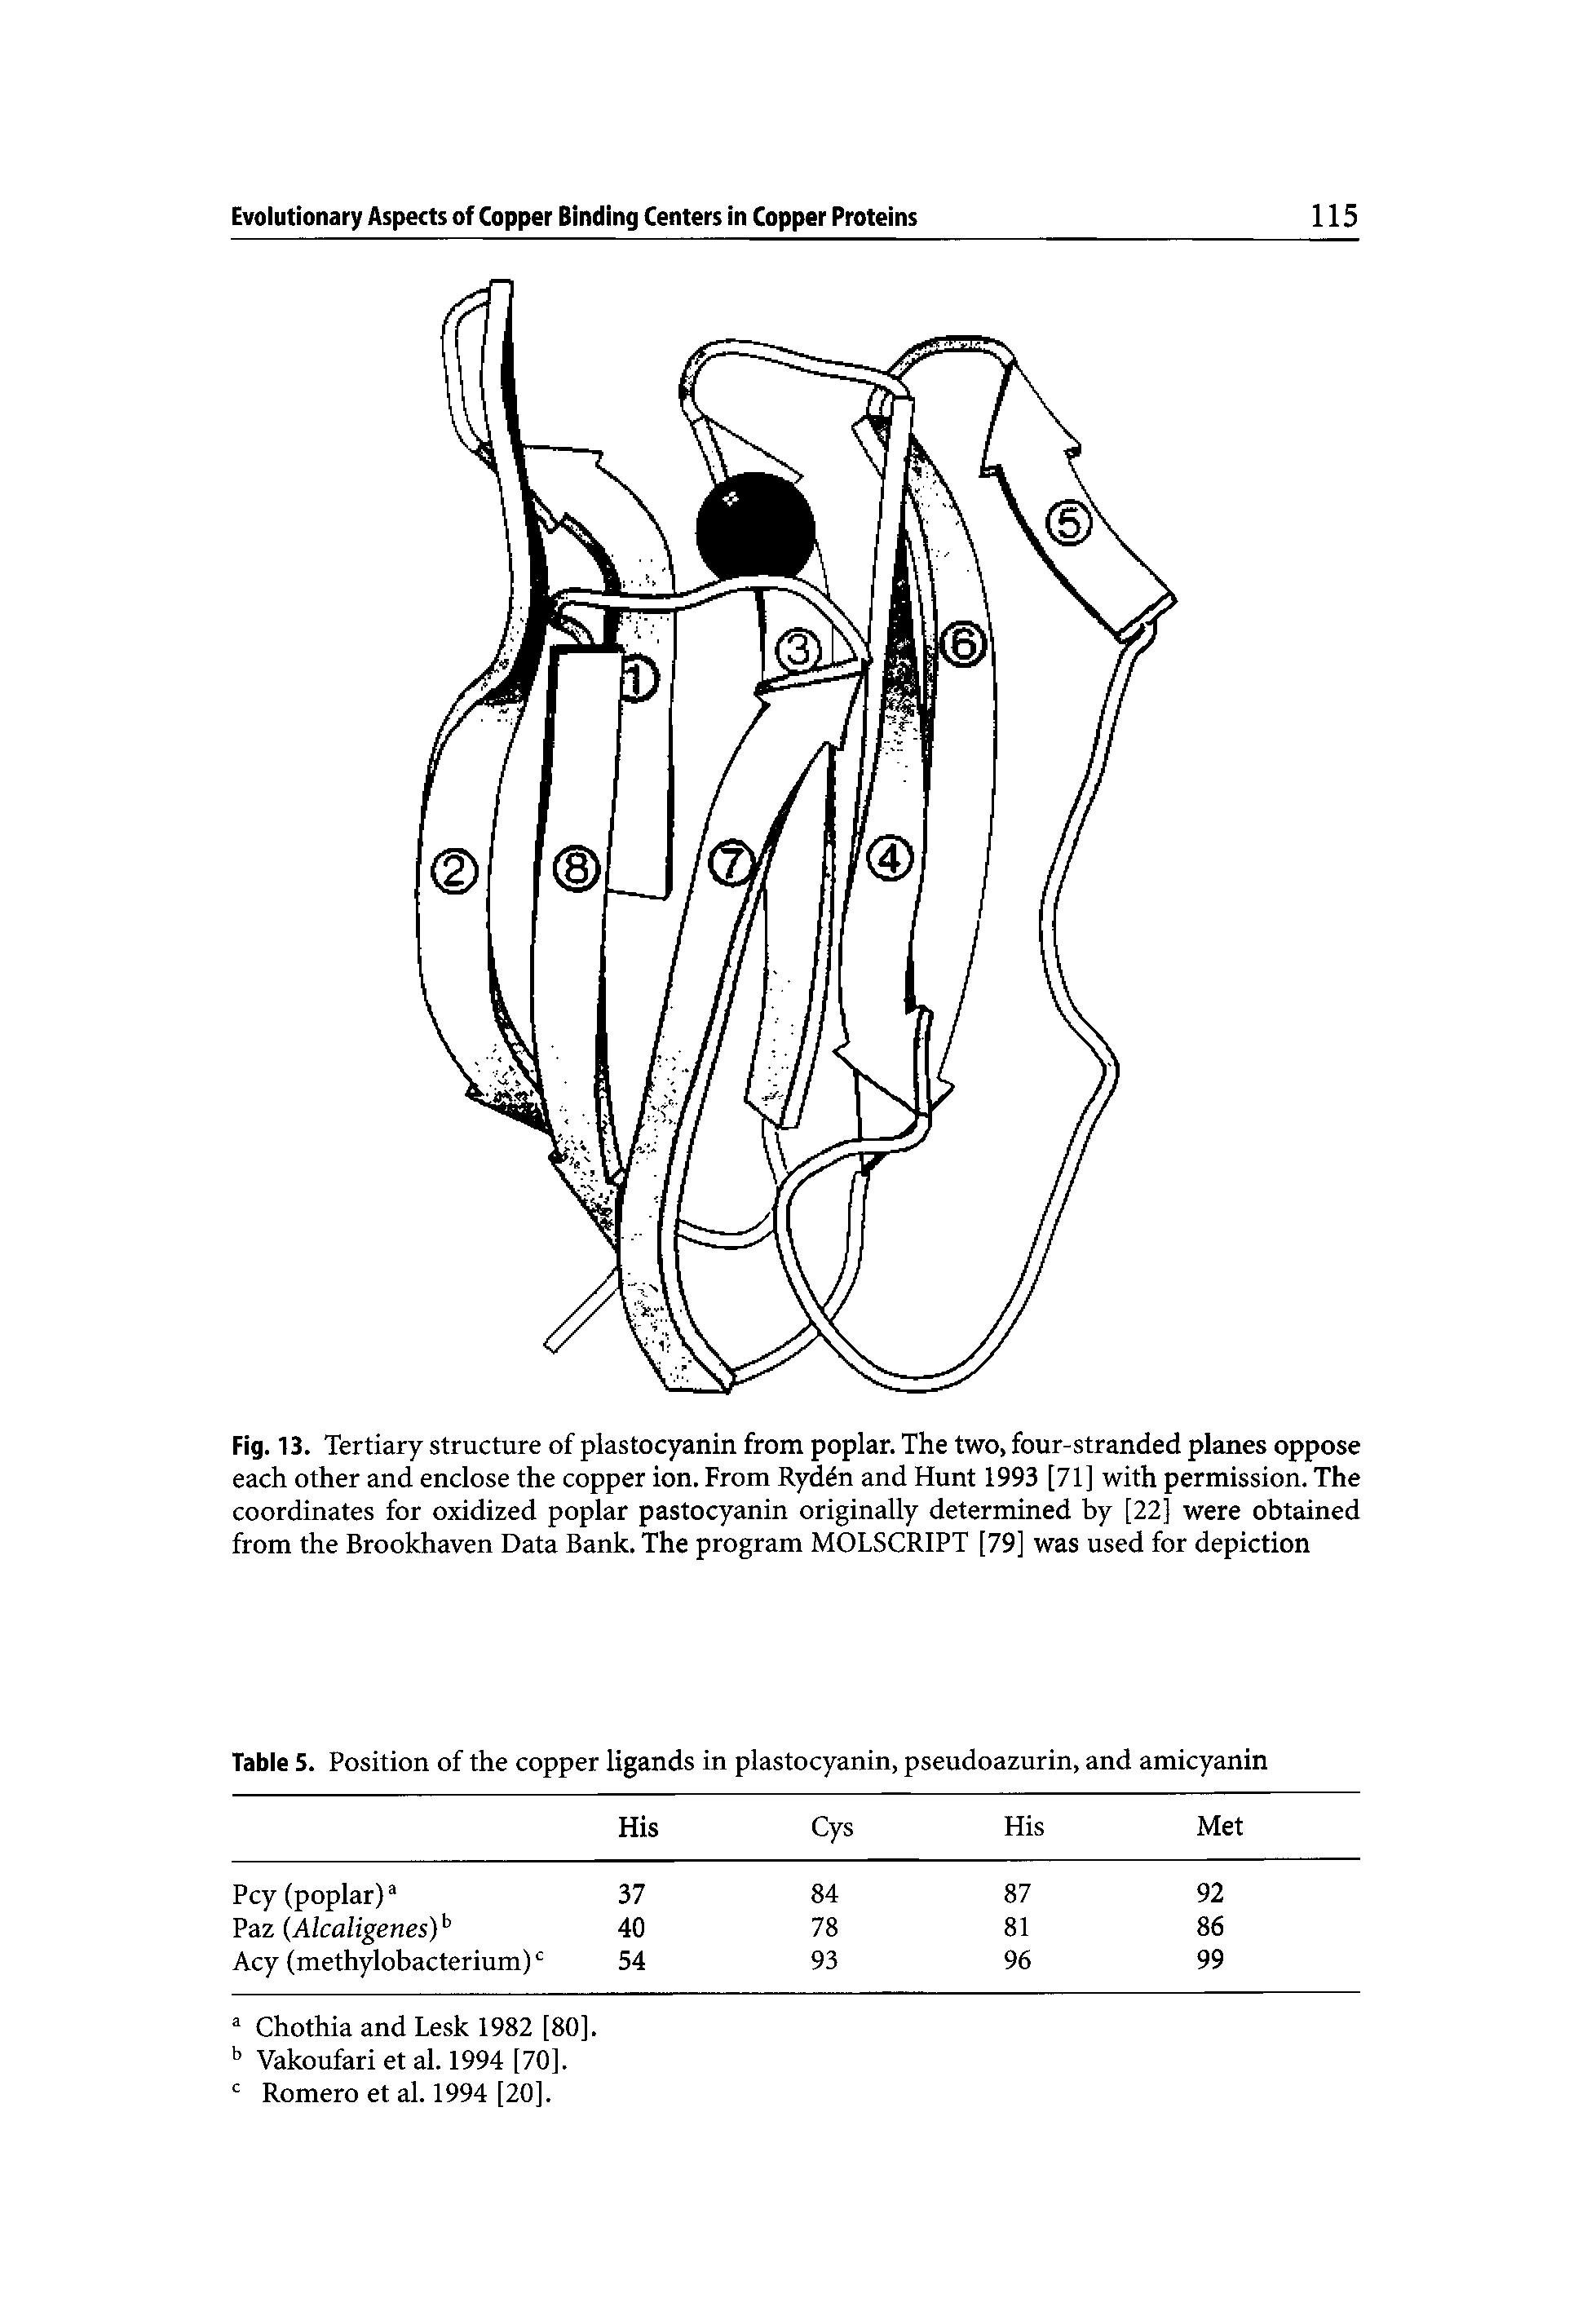 Fig. 13. Tertiary structure of plastocyanin from poplar. The two, four-stranded planes oppose each other and enclose the copper ion. From Ryden and Hunt 1993 [71] with permission. The coordinates for oxidized poplar pastocyanin originally determined by [22] were obtained from the Brookhaven Data Bank. The program MOLSCRIPT [79] was used for depiction...